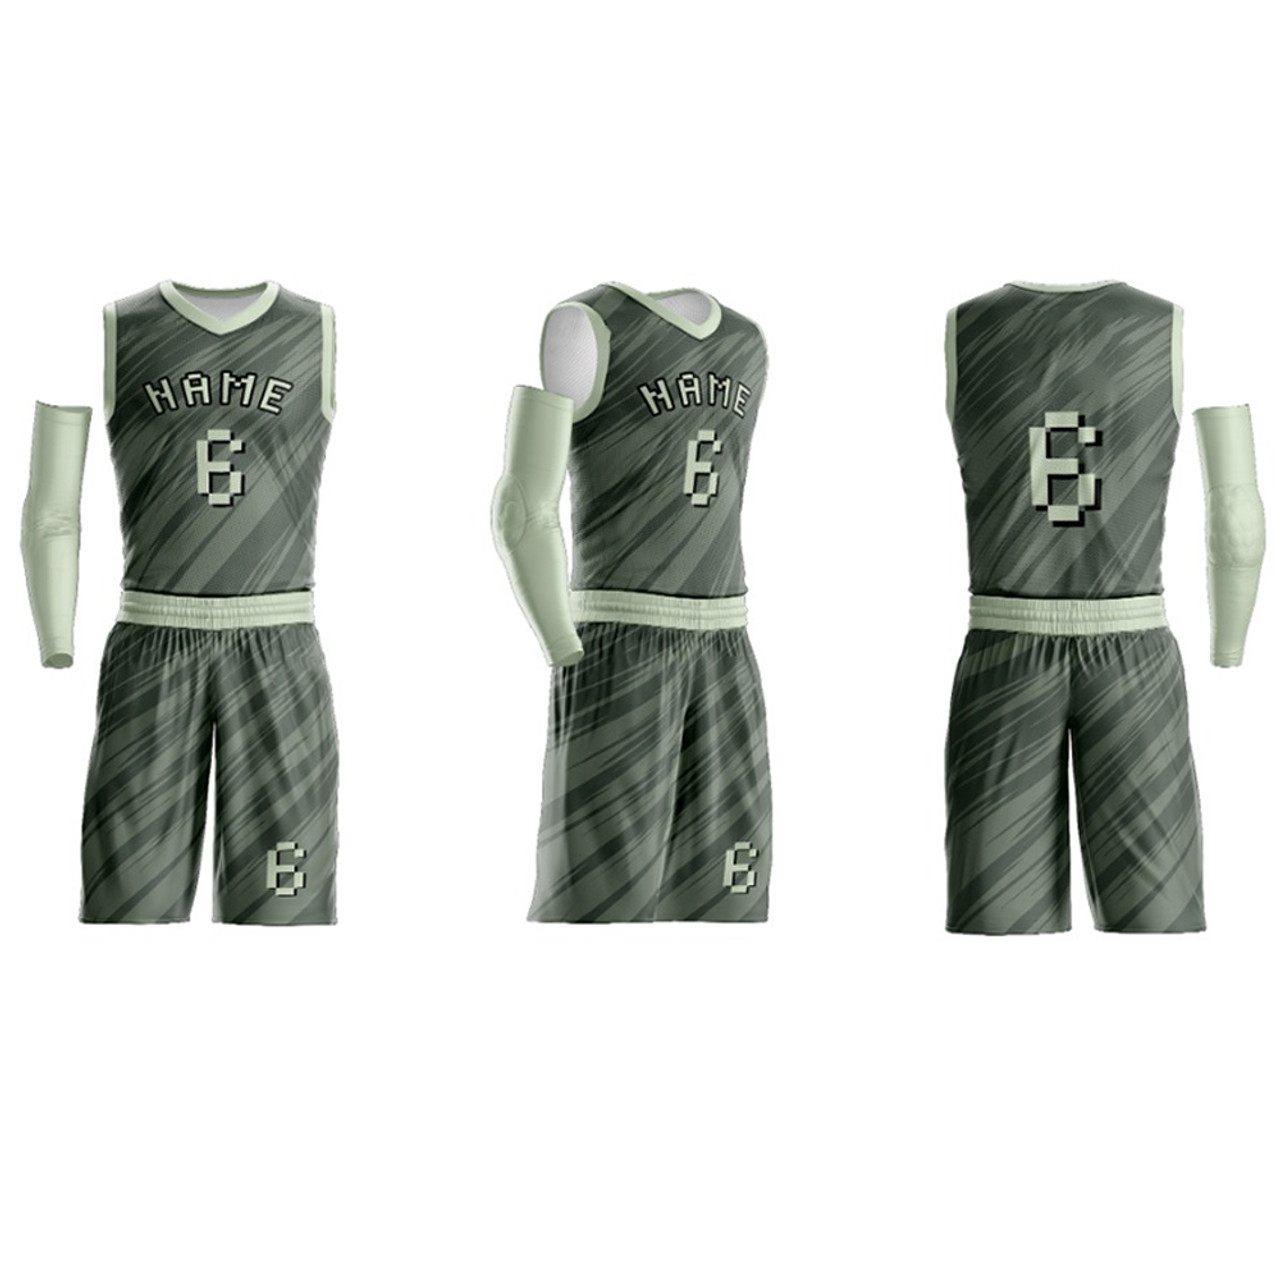 custom team basketball jerseys instock unifroms print with name and number  ,kids&men's basketball uniform 33